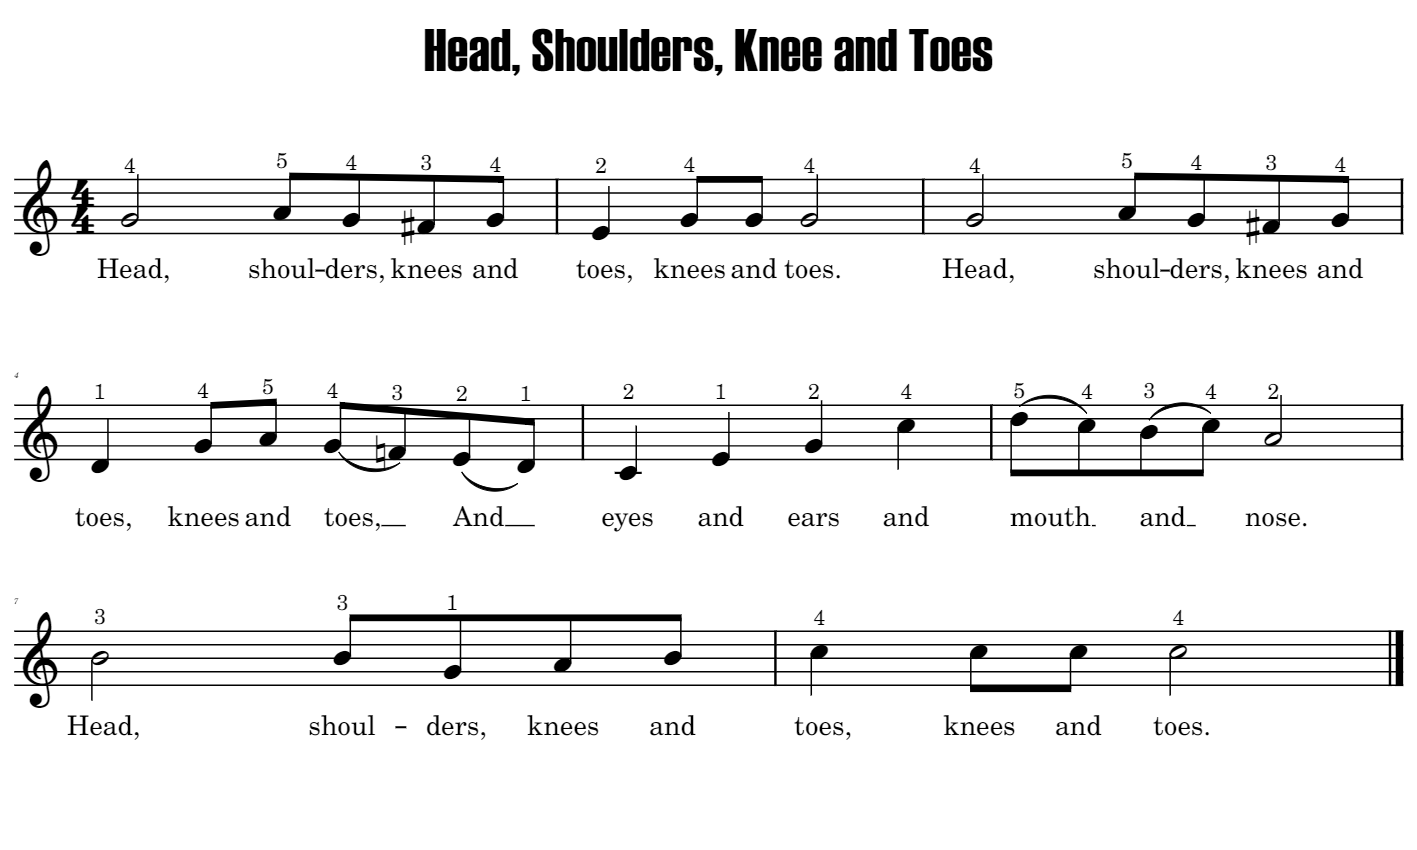 Head Shoulders Knees and Toes. Head and Shoulders Knees and Toes песня. Текст песни head Shoulders Knees and Toes. Нев Shoulders Knees Toes. Head and shoulders песенка на английском